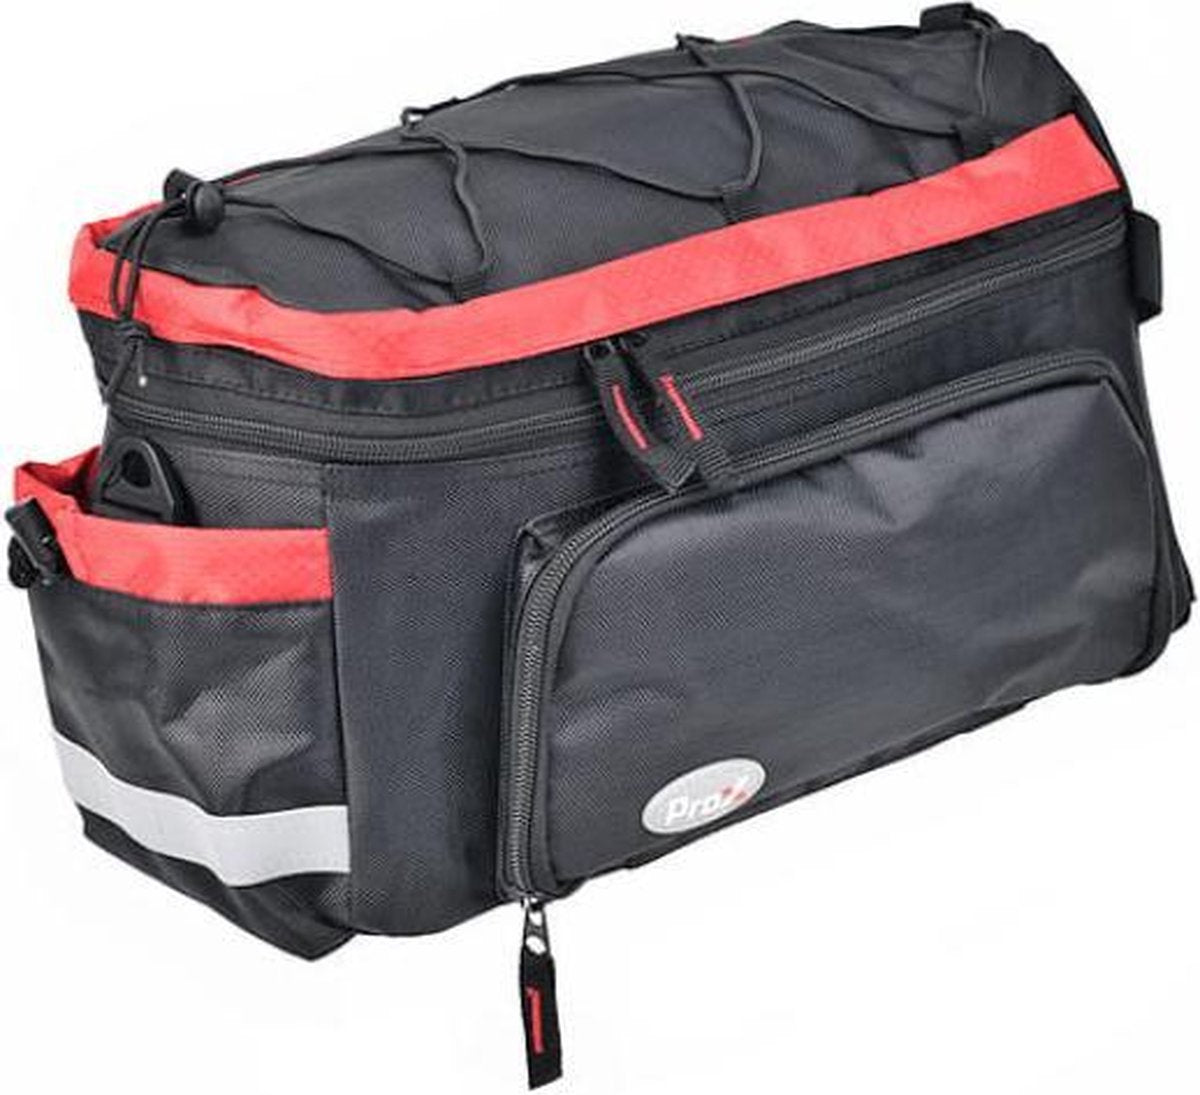 Bicycle Bag Red ProX 15 Liter Luggage Carrier Bag with Rain Cover